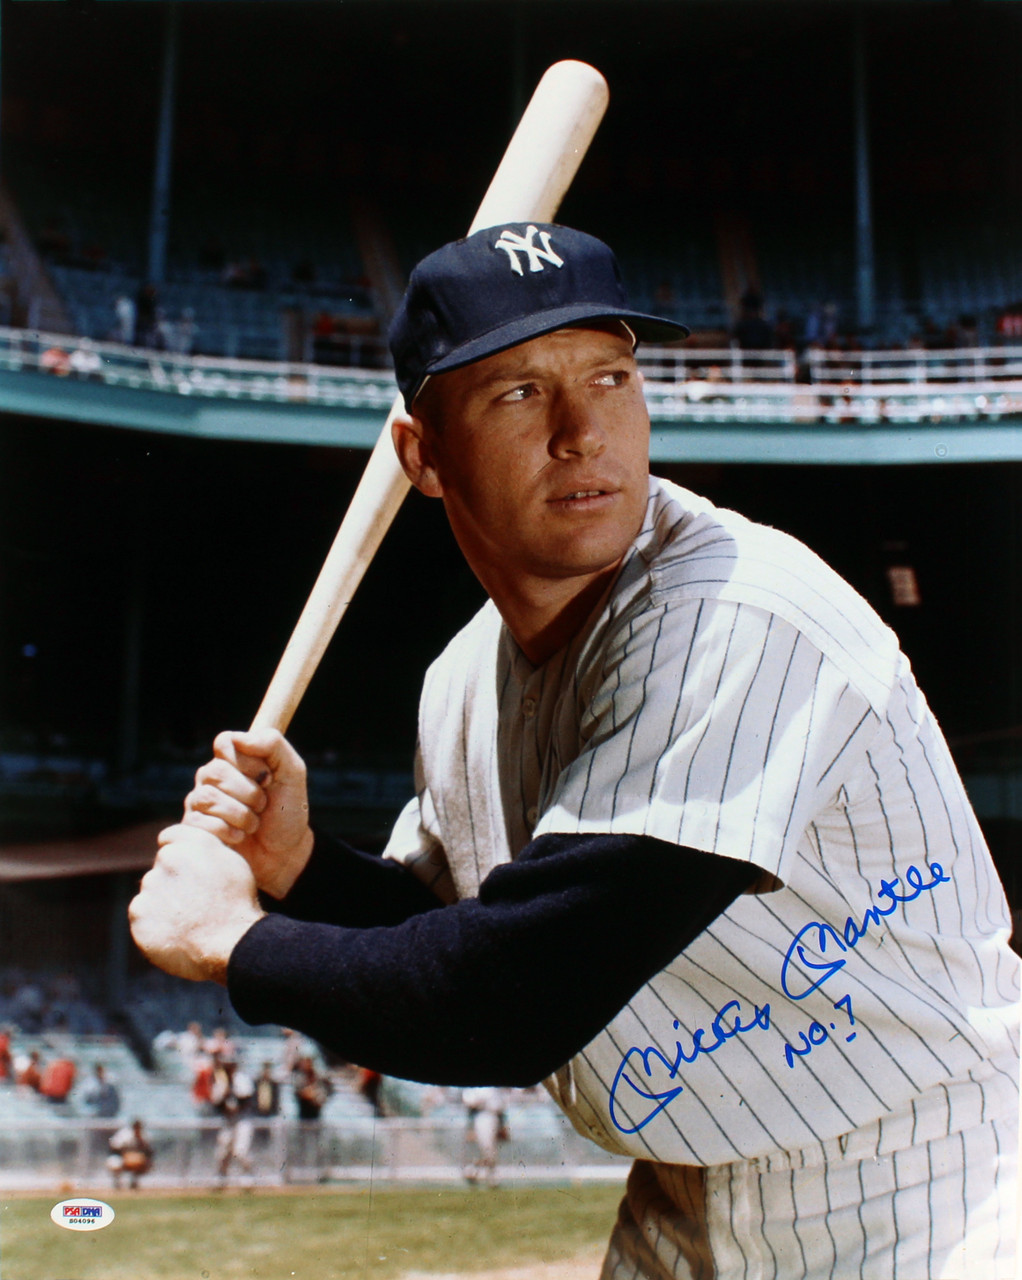 Mickey Mantle Signed Slabbed 8x10 New York Yankees Photo BAS